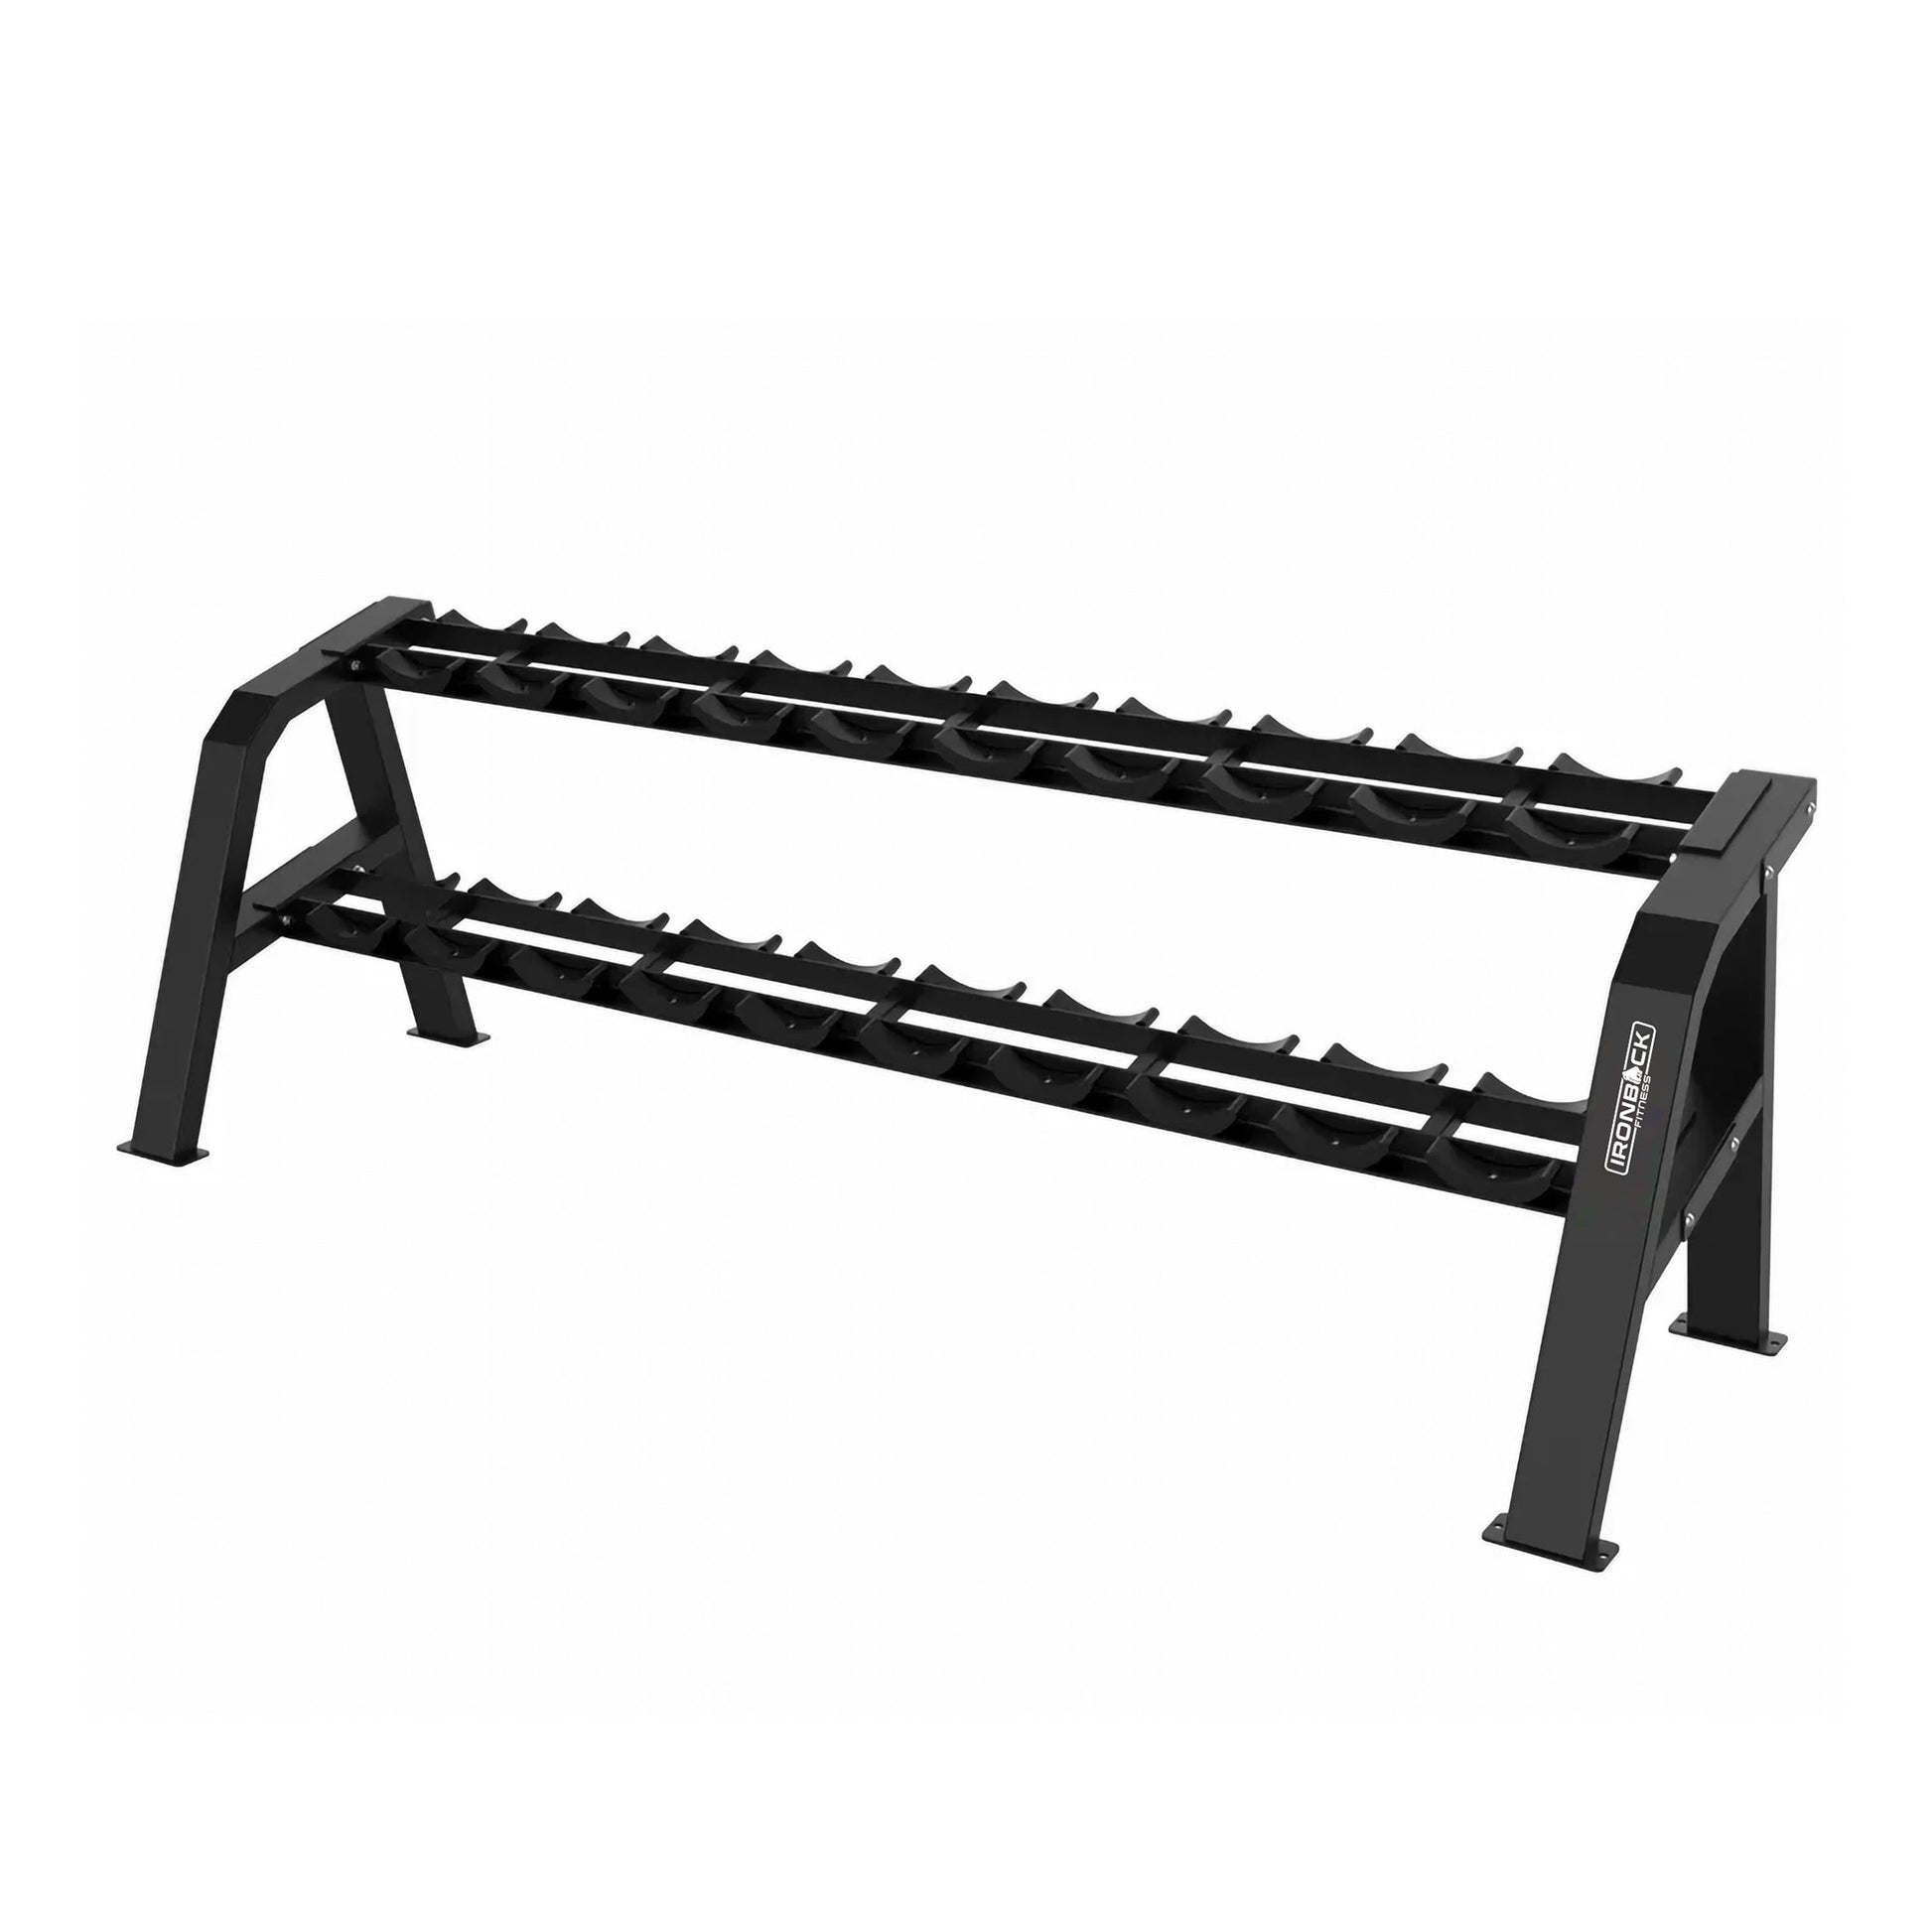 Dumbbell Set with 2 Tier Rack (12.5kg to 30kg Pairs) Ironback